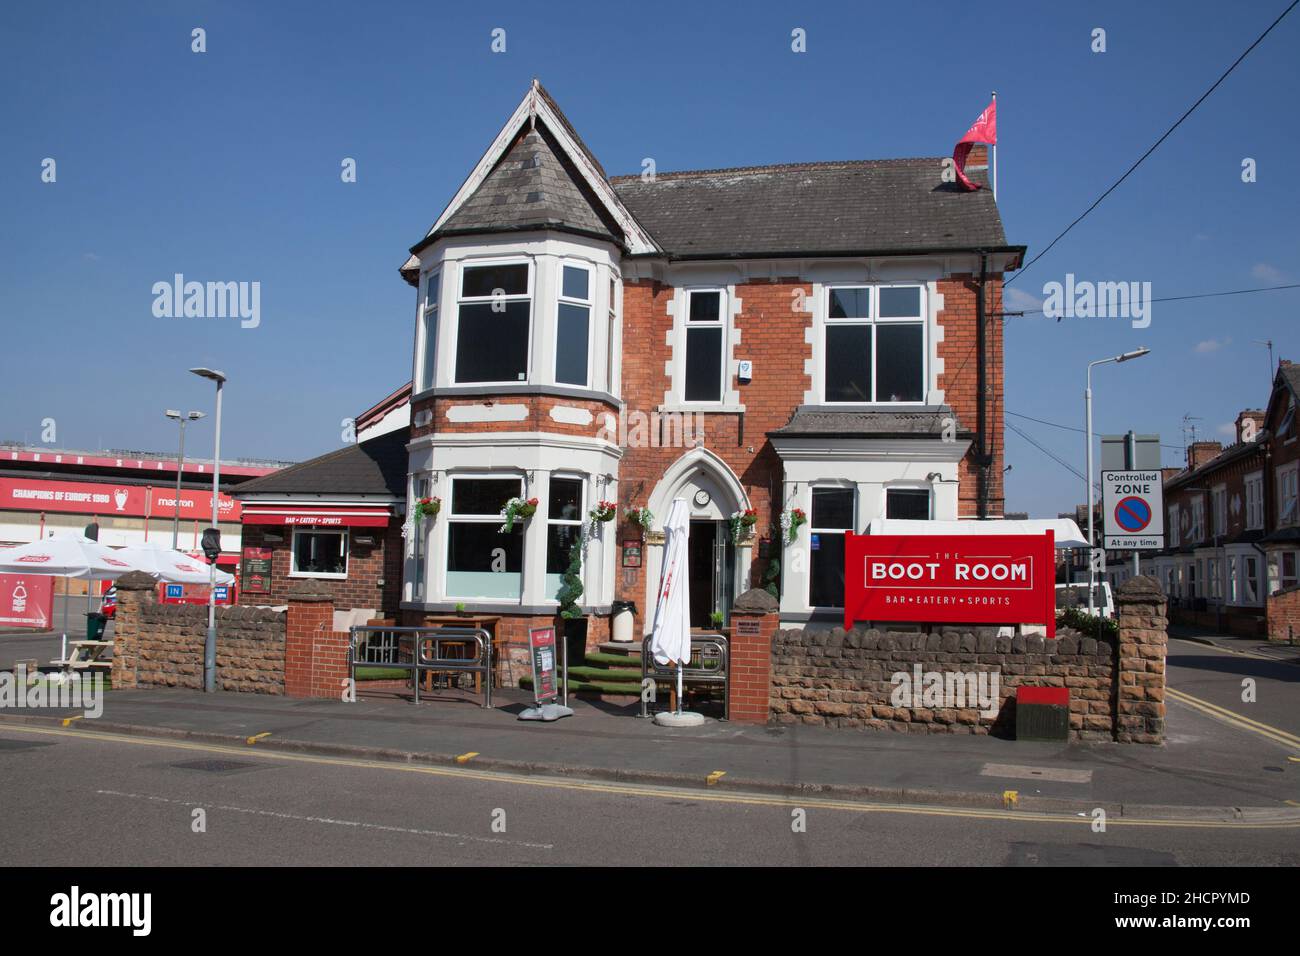 A local pub called The Boot Room in West Bridgford, Nottingham in the UK Stock Photo